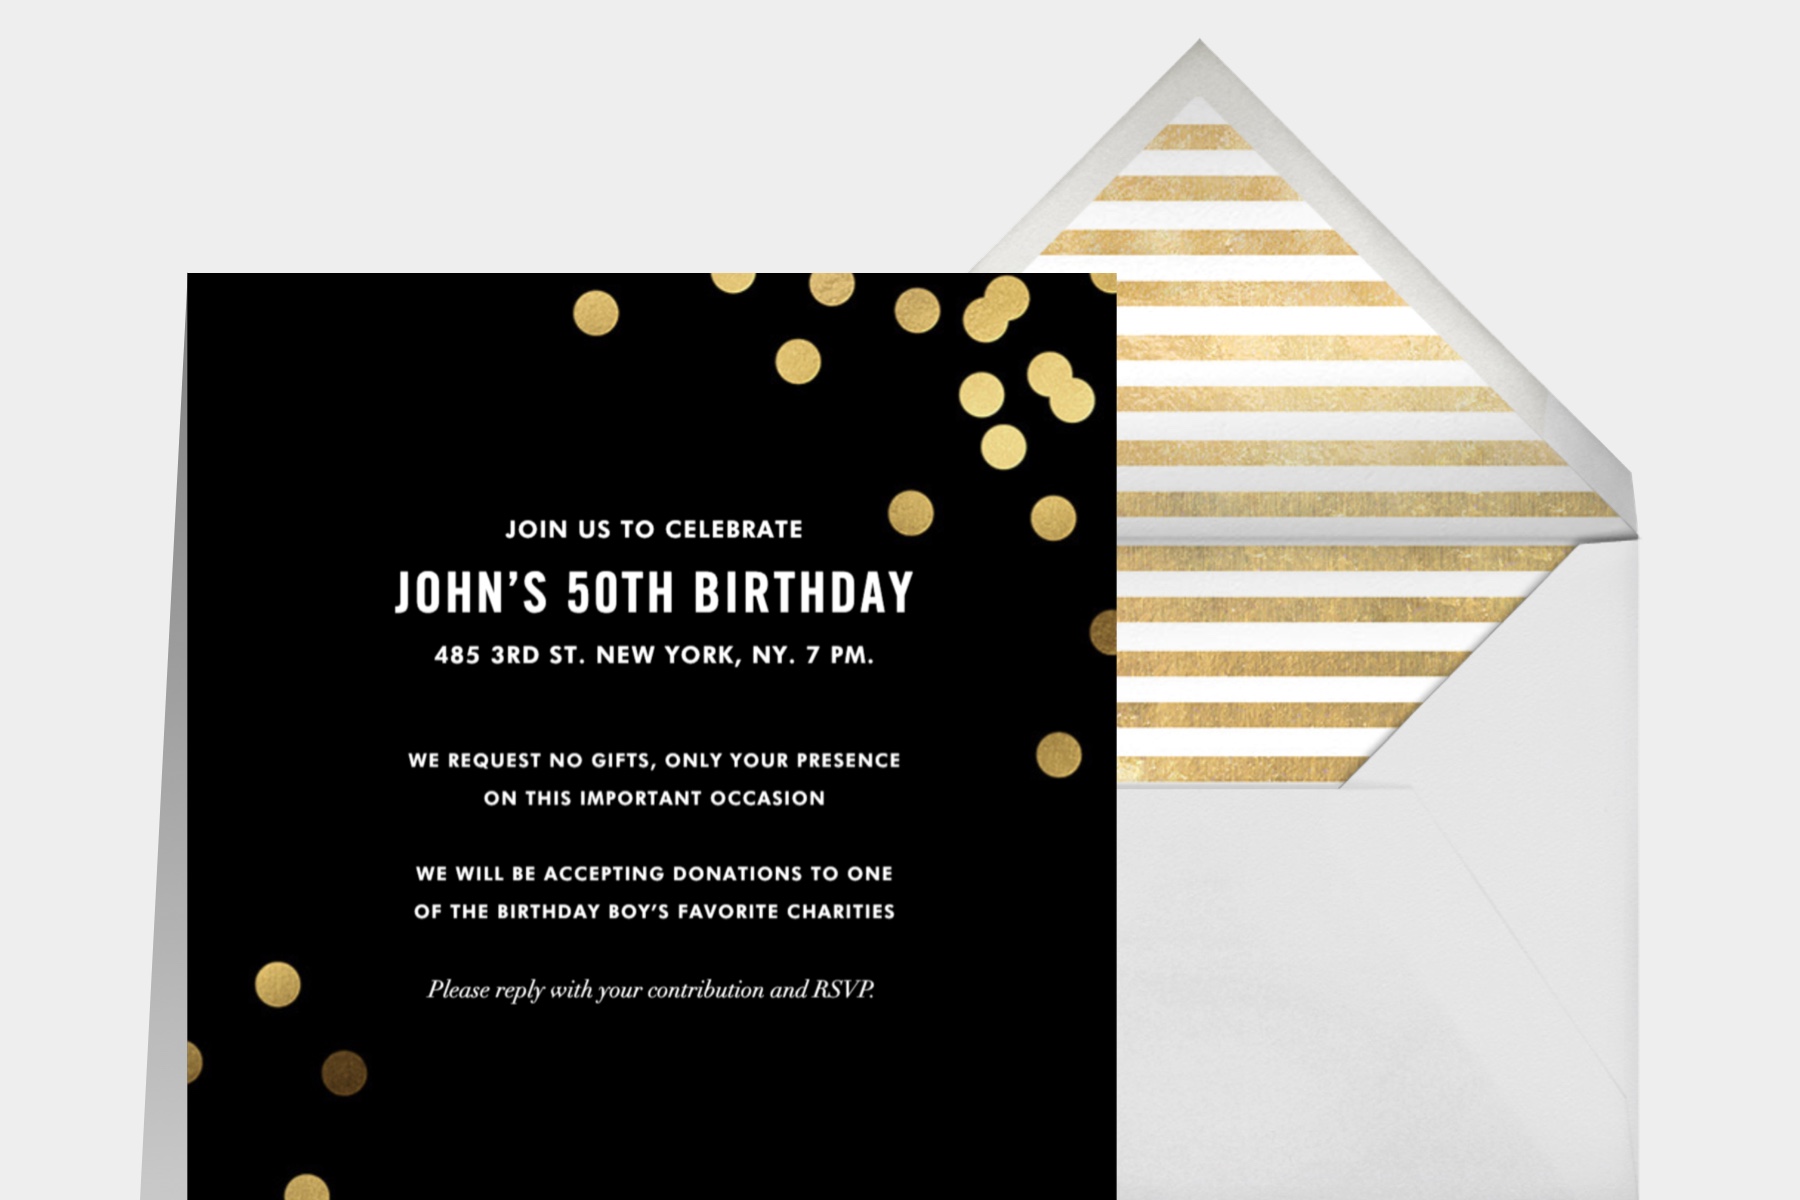 “Confetti (Square) - Black” invitation by kate spade new york for Paperless Post featuring a black card with gold confetti details on a white background.